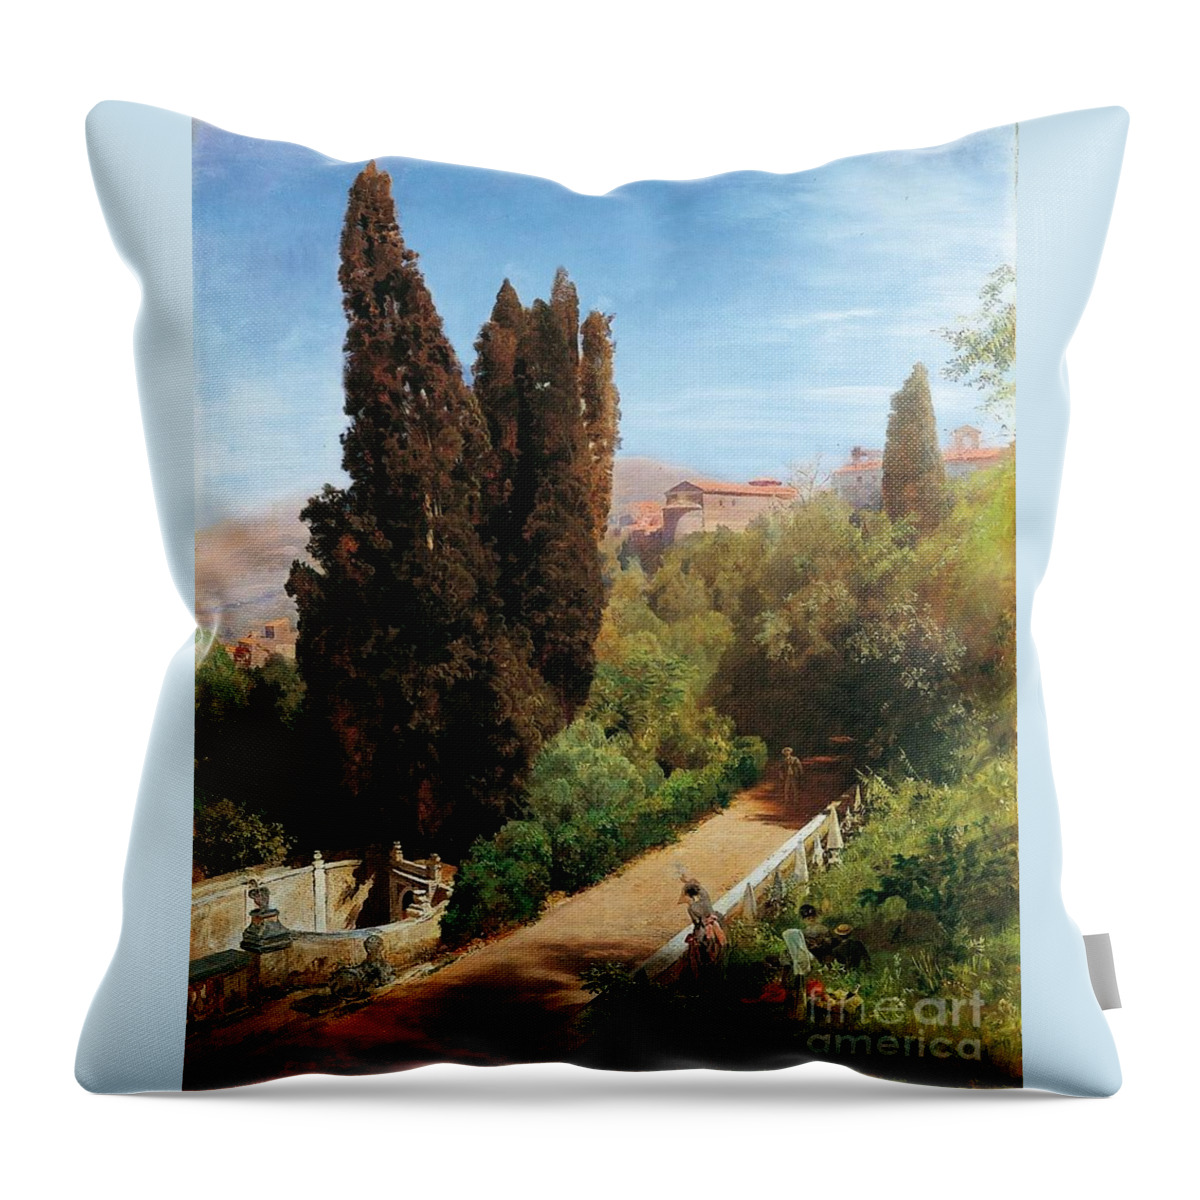 Oswald Achenbach Throw Pillow featuring the painting Park Der Villa Dieste by MotionAge Designs